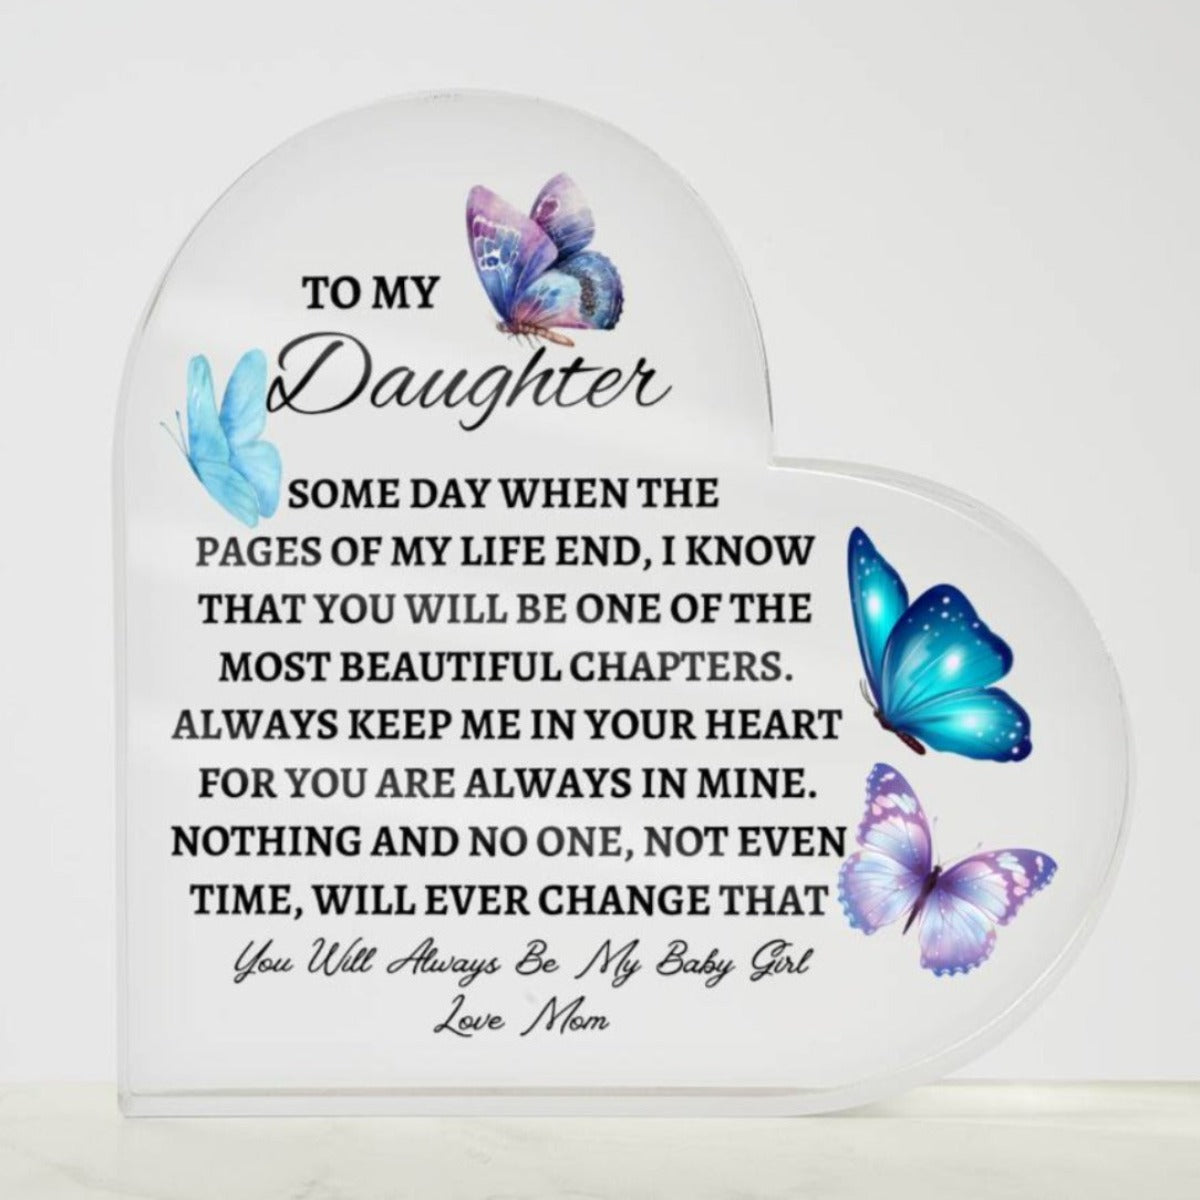 Forever in My Heart: Heart-Shaped Acrylic Plaques for Daughters